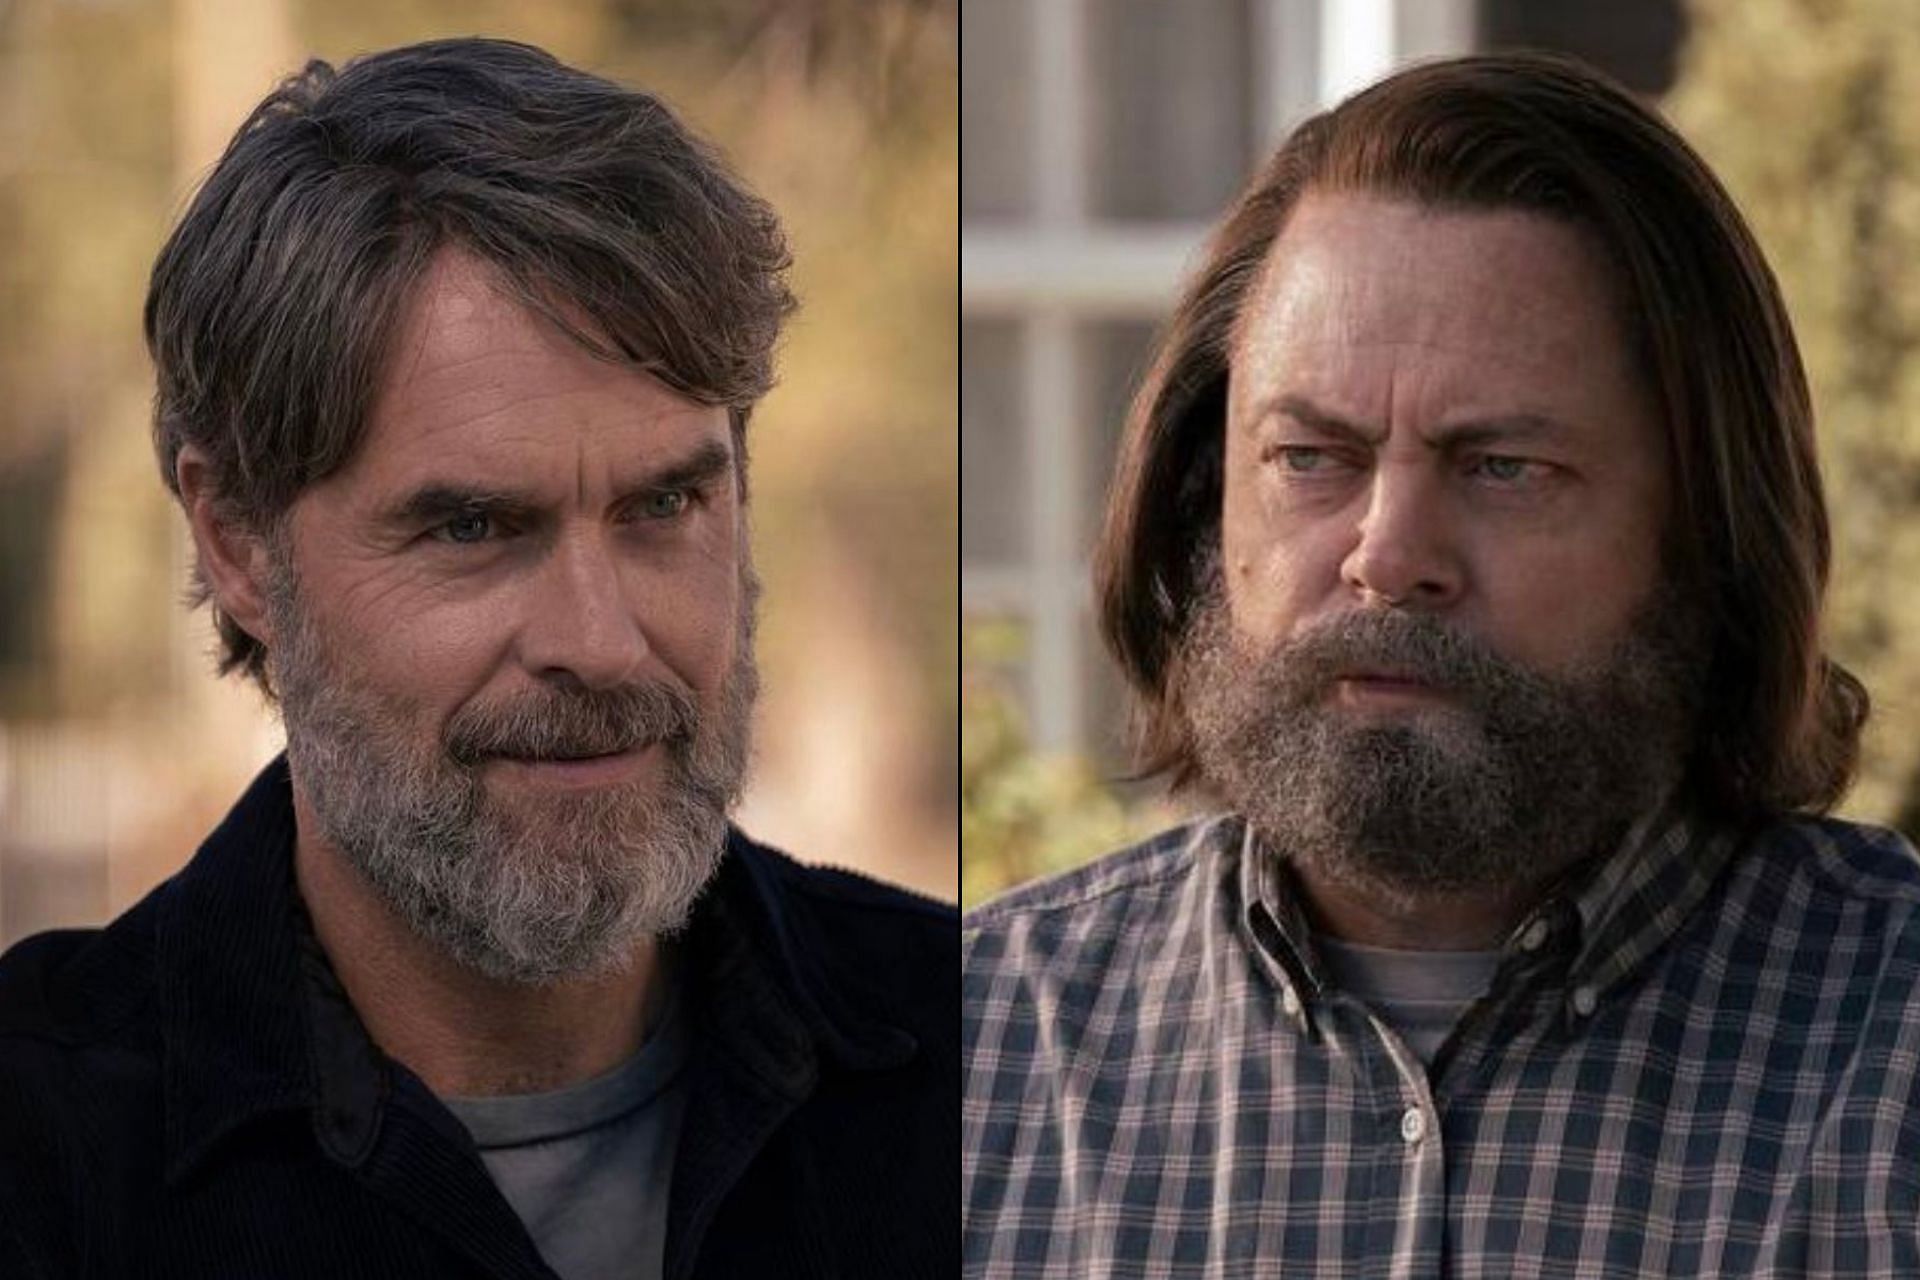  Frank is played by Murray Bartlett while Bill by Nick Offerman (Image via Twitter/@therealsupes) 